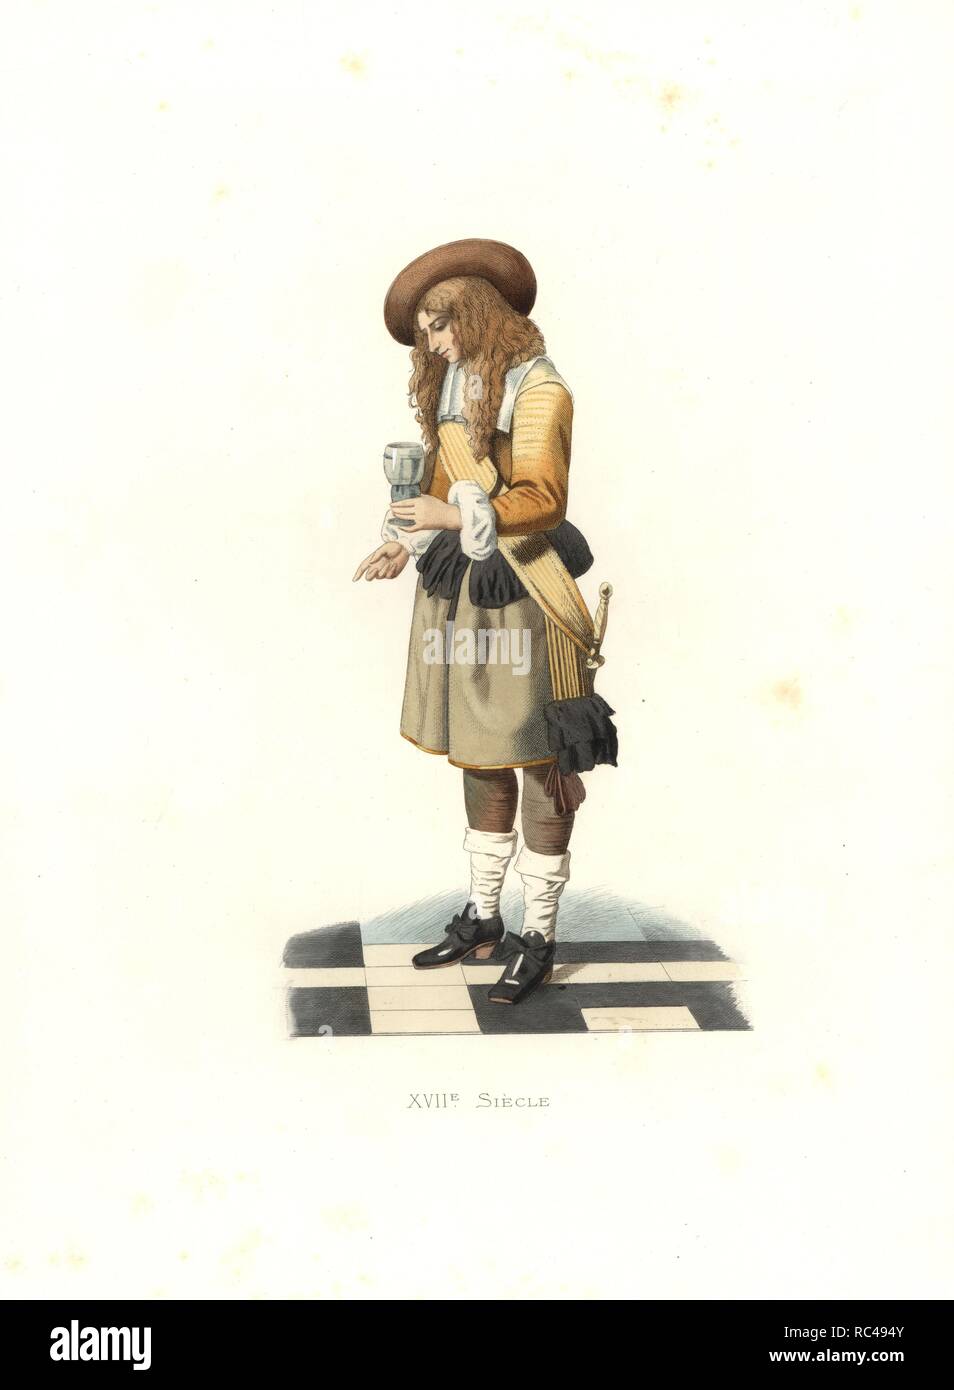 Gentleman of Holland, 17th century, from a painting by Pierre de Hooch. Handcolored illustration by E. Lechevallier-Chevignard, lithographed by A. Didier, L. Flameng, F. Laguillermie, from Georges Duplessis's 'Costumes historiques des XVIe, XVIIe et XVIIIe siecles' (Historical costumes of the 16th, 17th and 18th centuries), Paris 1867. The book was a continuation of the series on the costumes of the 12th to 15th centuries published by Camille Bonnard and Paul Mercuri from 1830. Georges Duplessis (1834-1899) was curator of the Prints department at the Bibliotheque nationale. Edmond Lechevallier Stock Photo